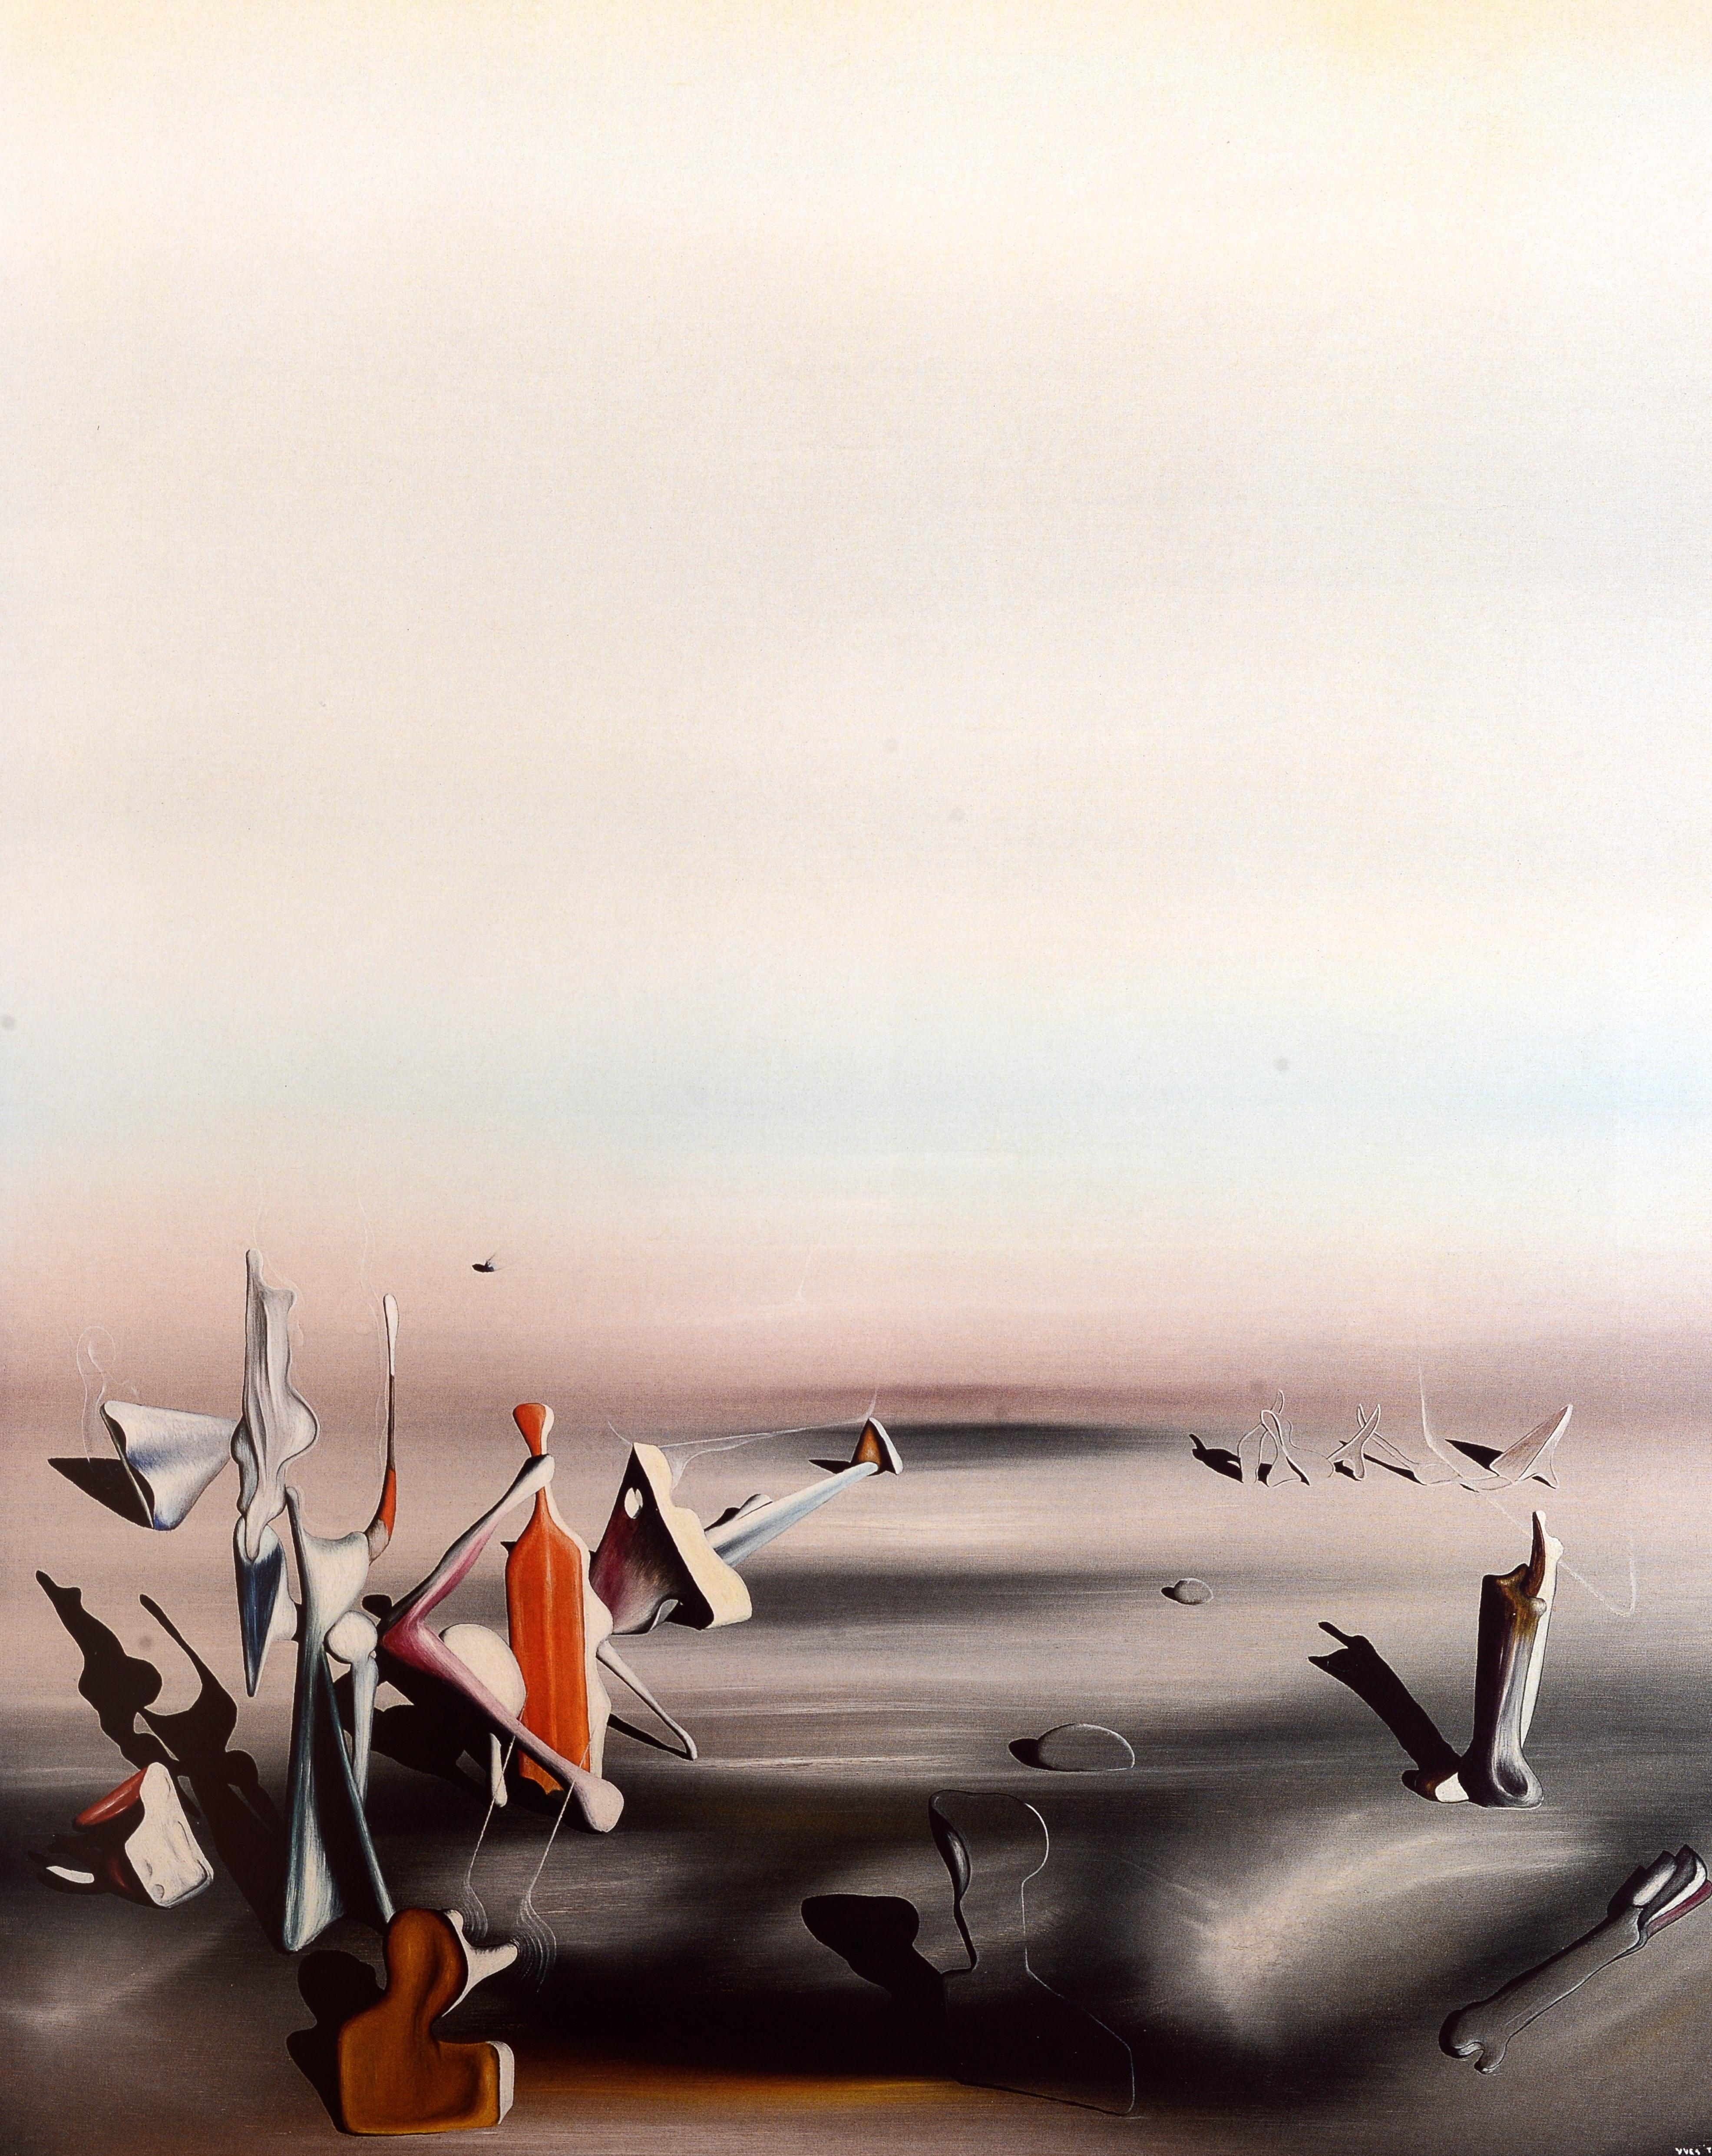 Paper Yves Tanguy & Alexander Calder Between Surrealism and Abstraction, 1st Ed For Sale